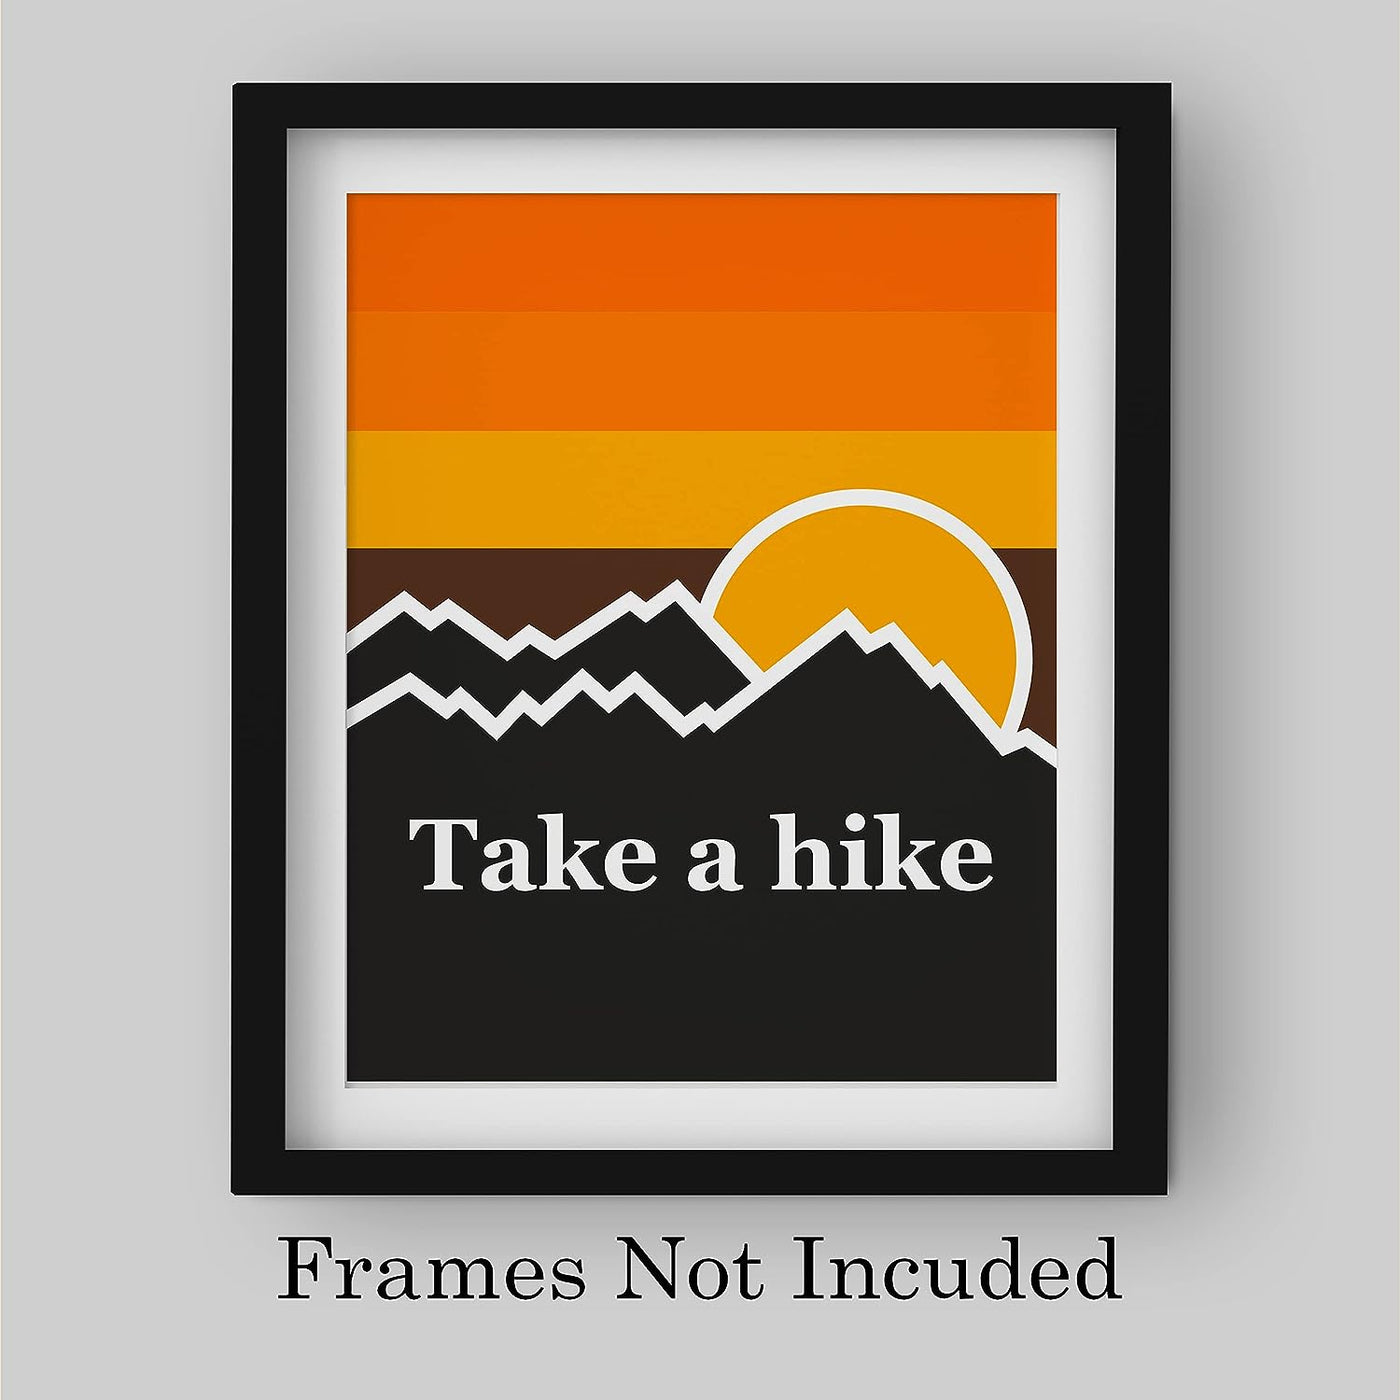 Take A Hike- Rustic Cabin Wall Decor -8 x 10" Retro Sunset Mountains Print-Ready to Frame. Perfect Wall Decor for Lake House-Lodge. Humorous Reminder to Get Out & Enjoy the Great Outdoors!